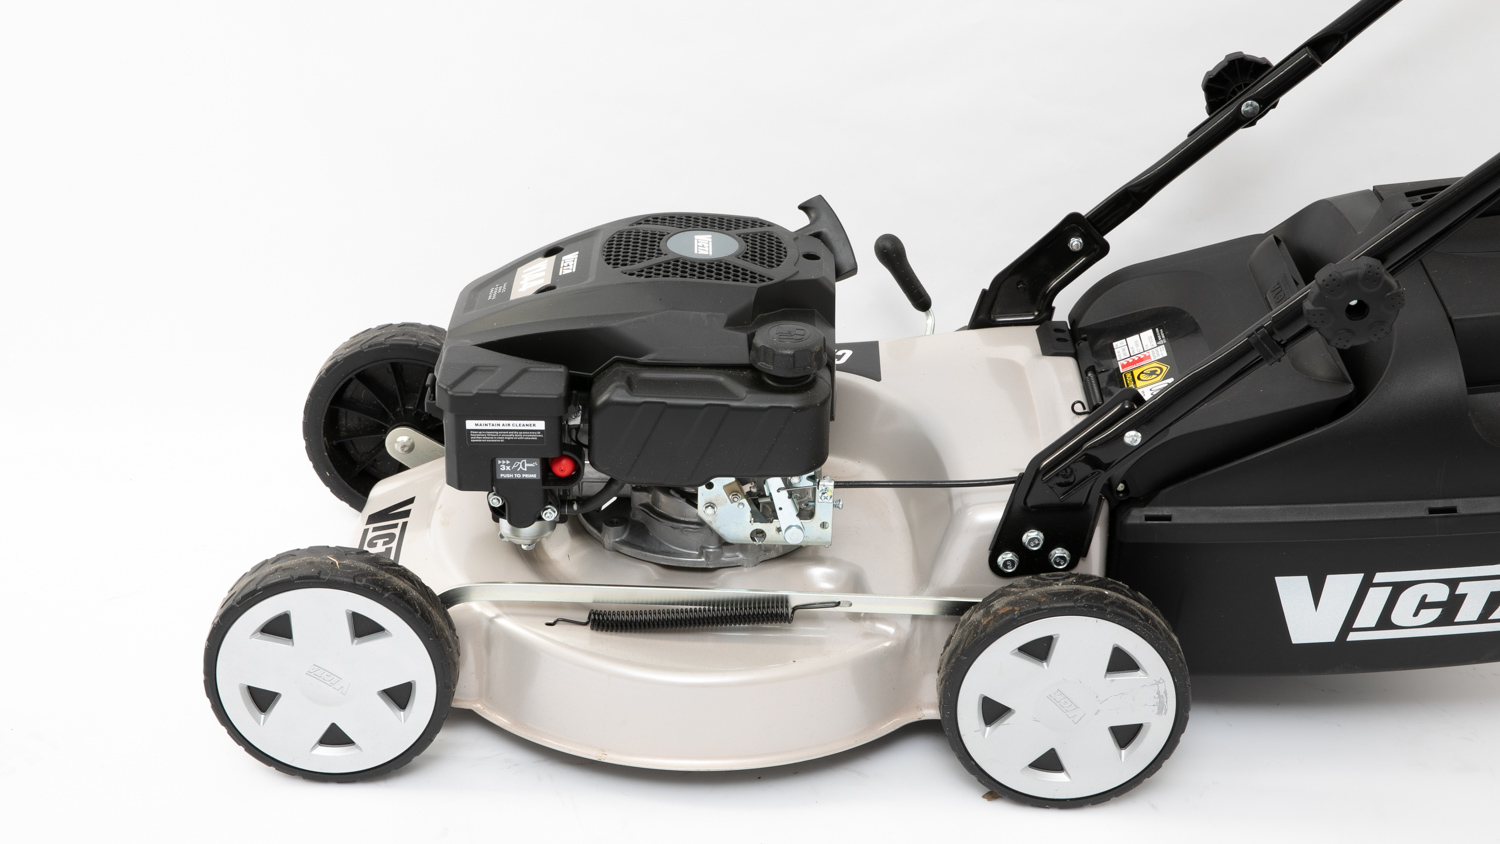 Victa Classic Cut Anniversary Edition Review Petrol Lawnmower Choice